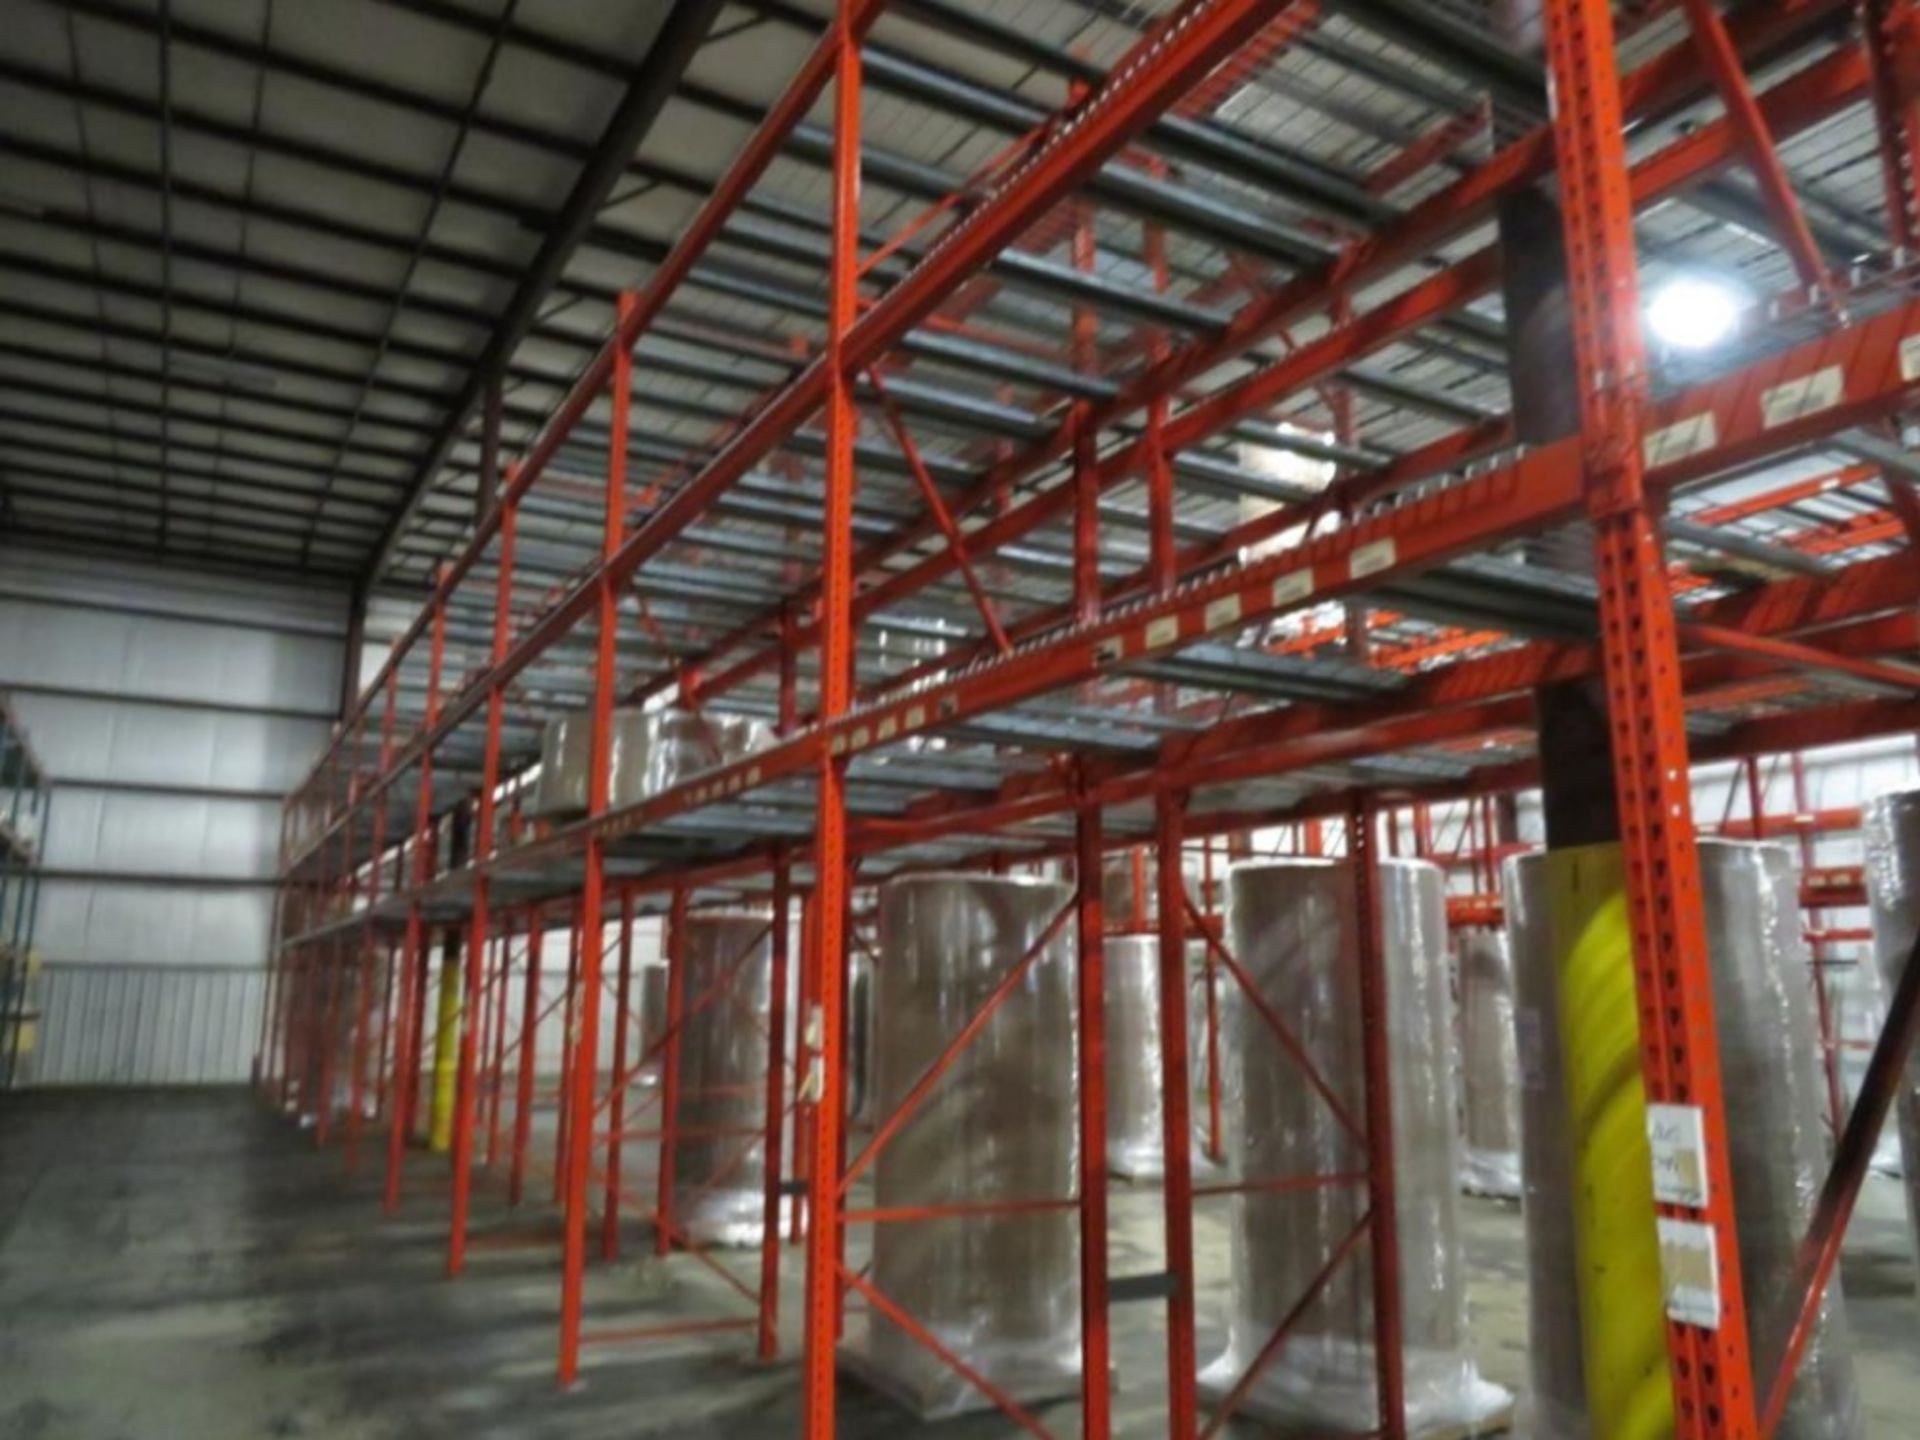 Interlake Pallet Racking 12 uprights 3"x 2 1/4", 42" wide and 18' tall, 66 beams 4 1/2" x 2 3/4" & - Image 5 of 5